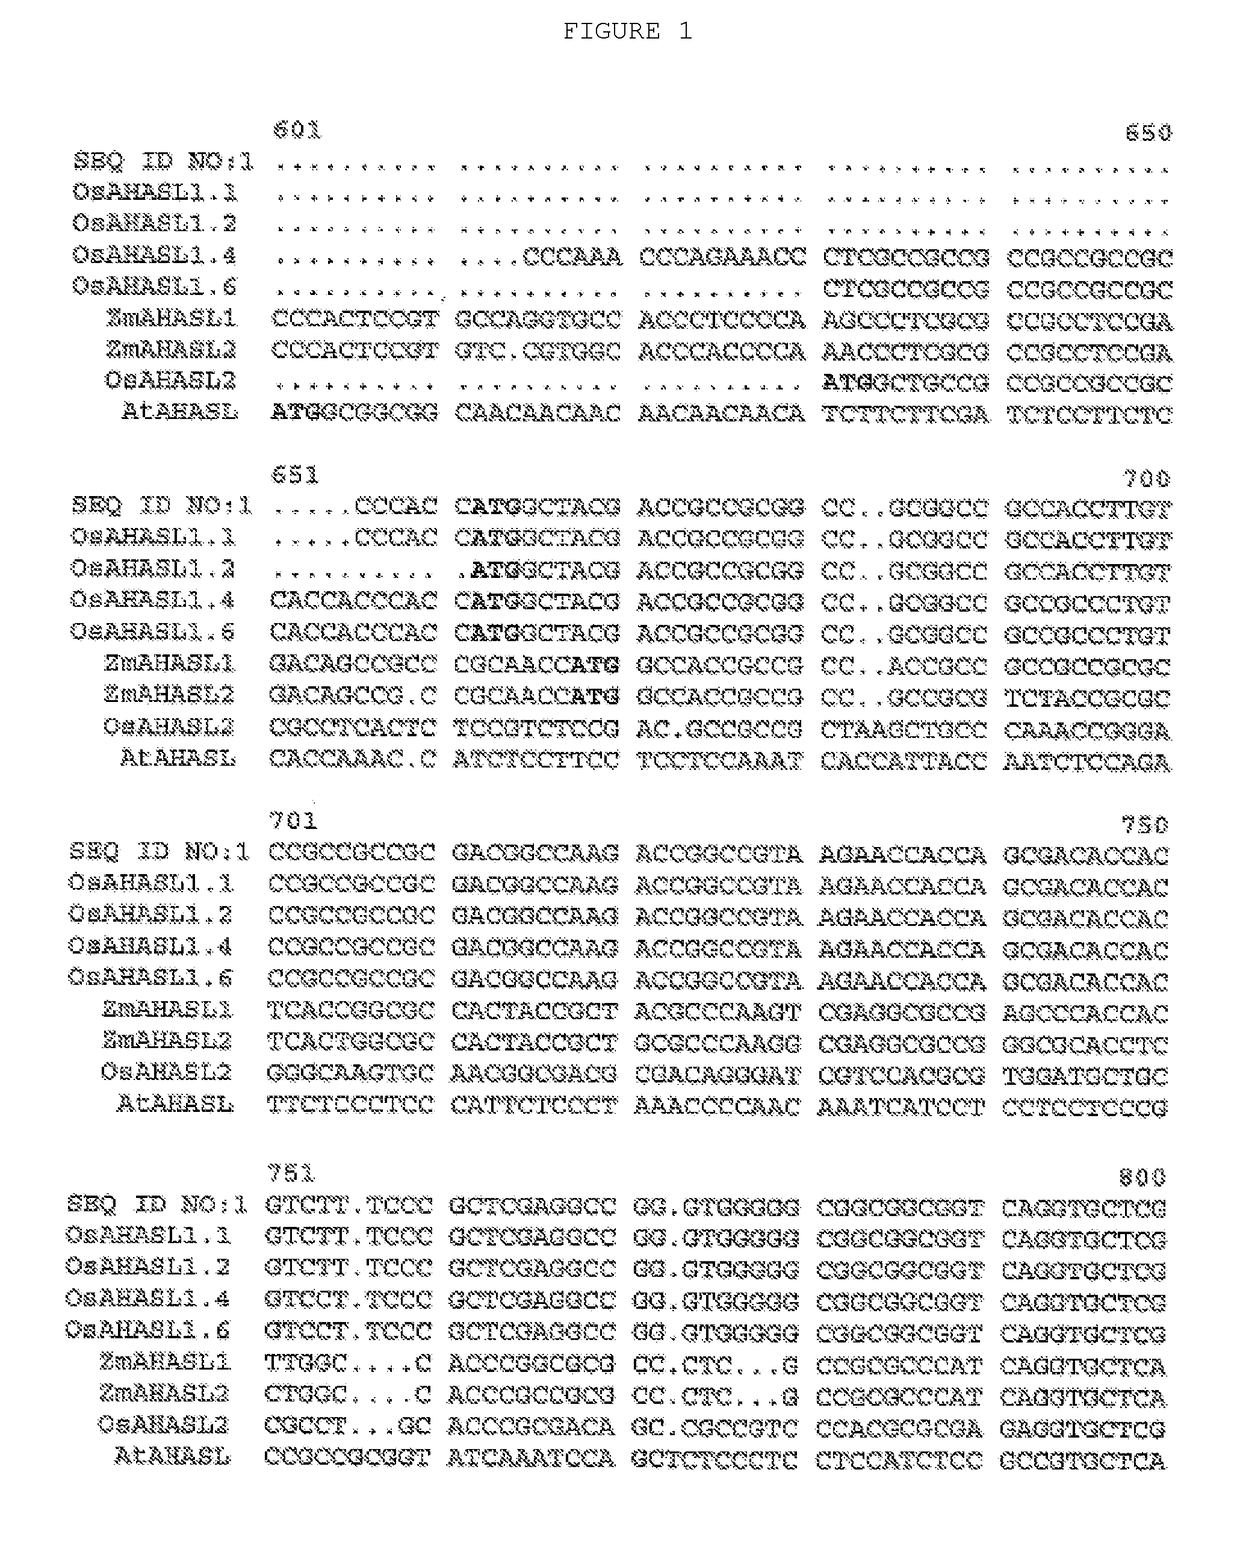 Herbicide-resistant rice plants, polynucleotides encoding herbicide-resistant acetohydroxyacid synthase large subunit proteins, and methods of use